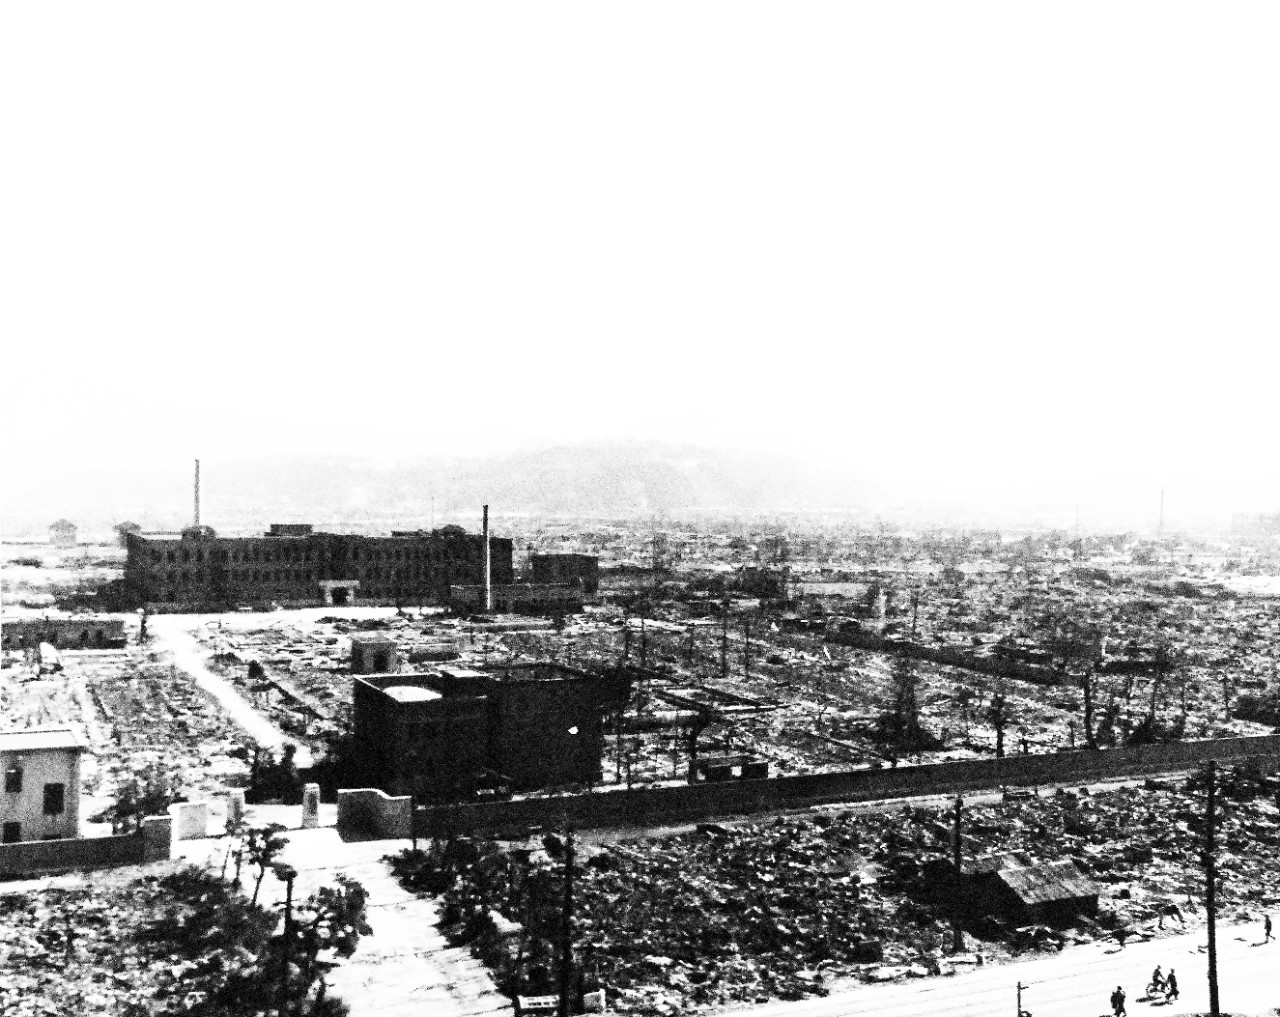 80-G-373266:  Hiroshima, Japan, 1945.     Atomic Bomb damage to Hiroshima, Japan.  Photograph released, October 14, 1945.  U.S. Navy Photograph, now in the collections of the National Archives. (2015/12/08).